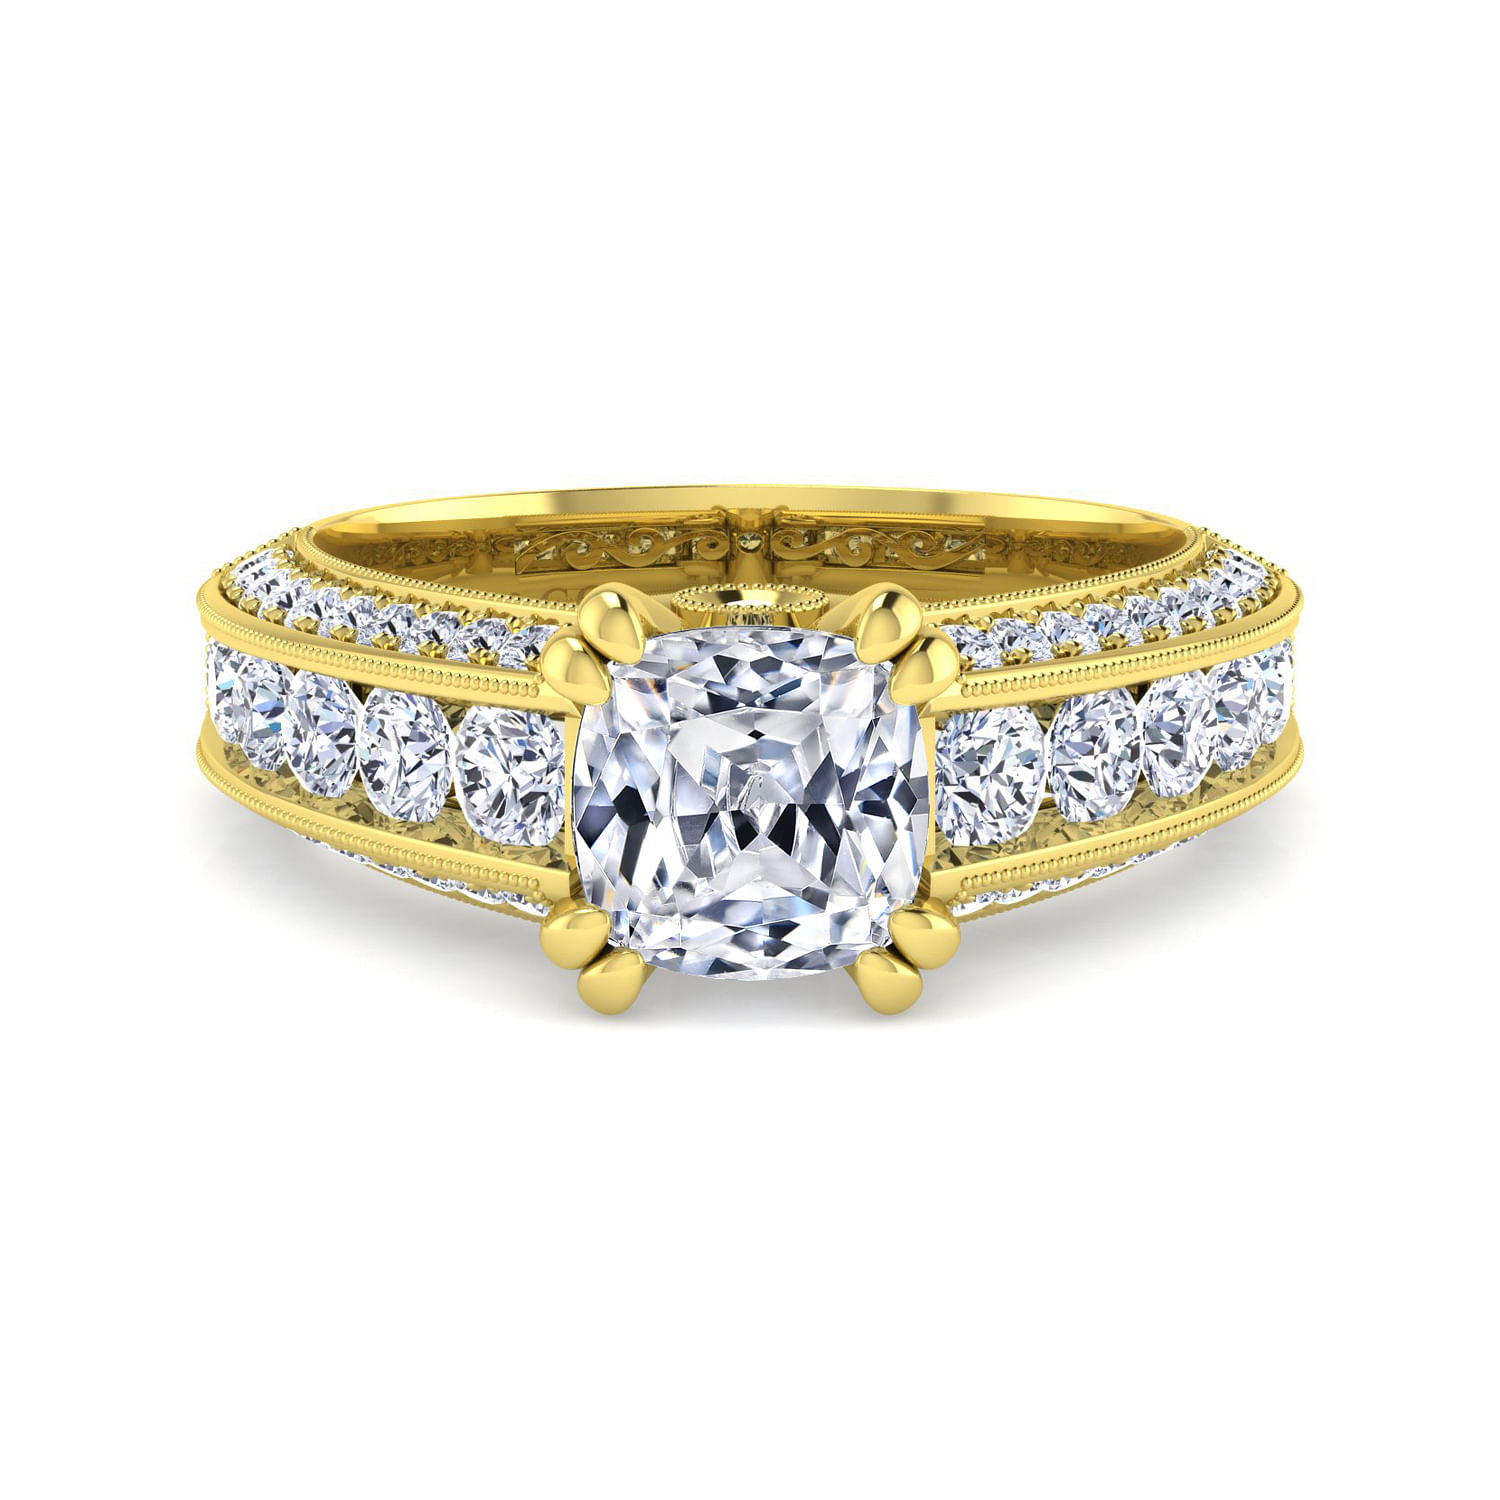 Vintage Inspired 14K Yellow Gold Wide Band Cushion Cut Diamond Engagement Ring